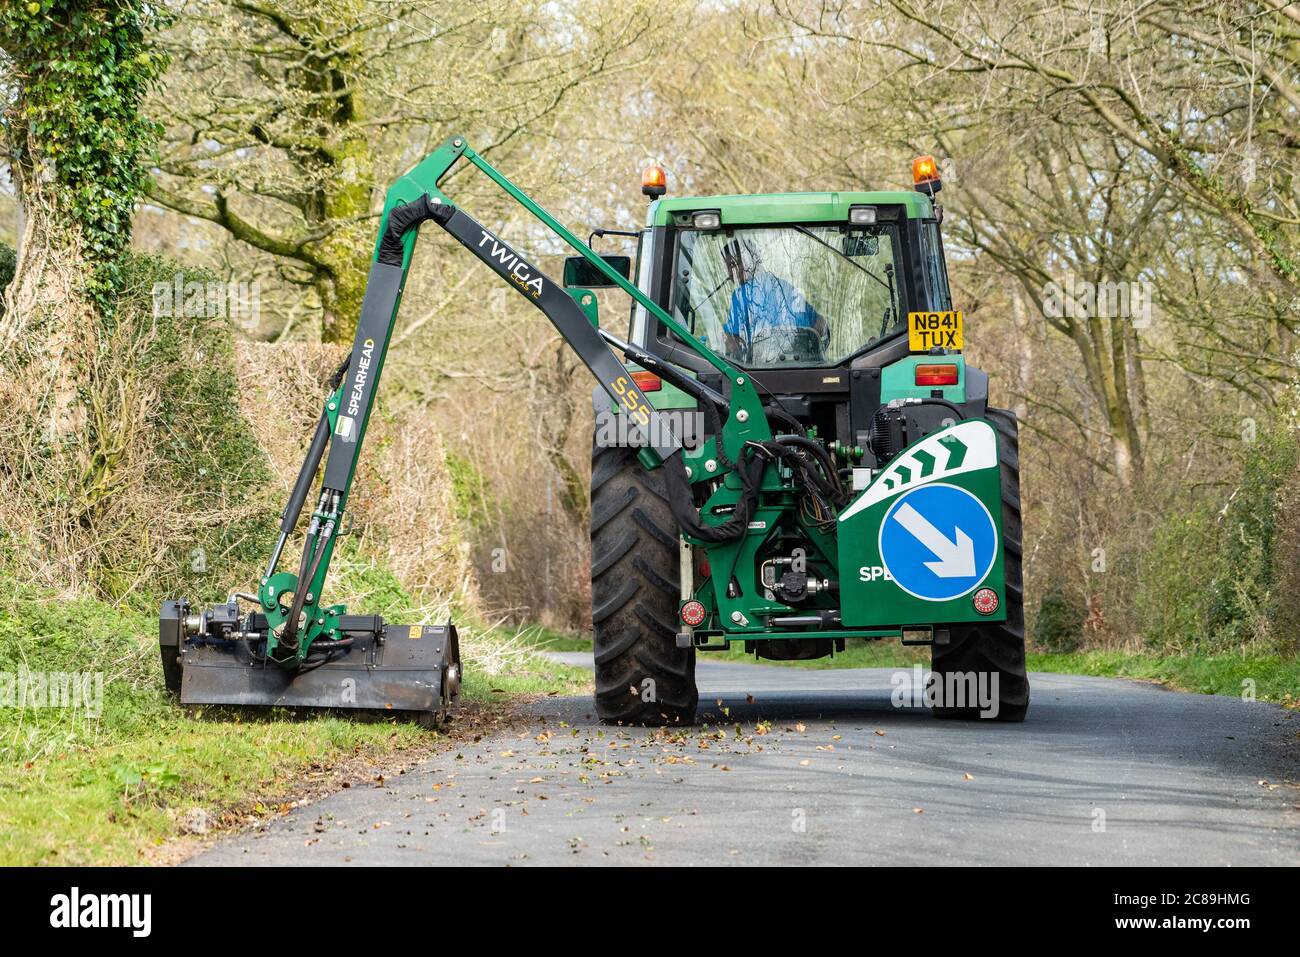 Cutting the grass verges with Spearhead mower and John Deere tractor, Chipping, Preston, Lancashire, England, United Kingdom. Stock Photo